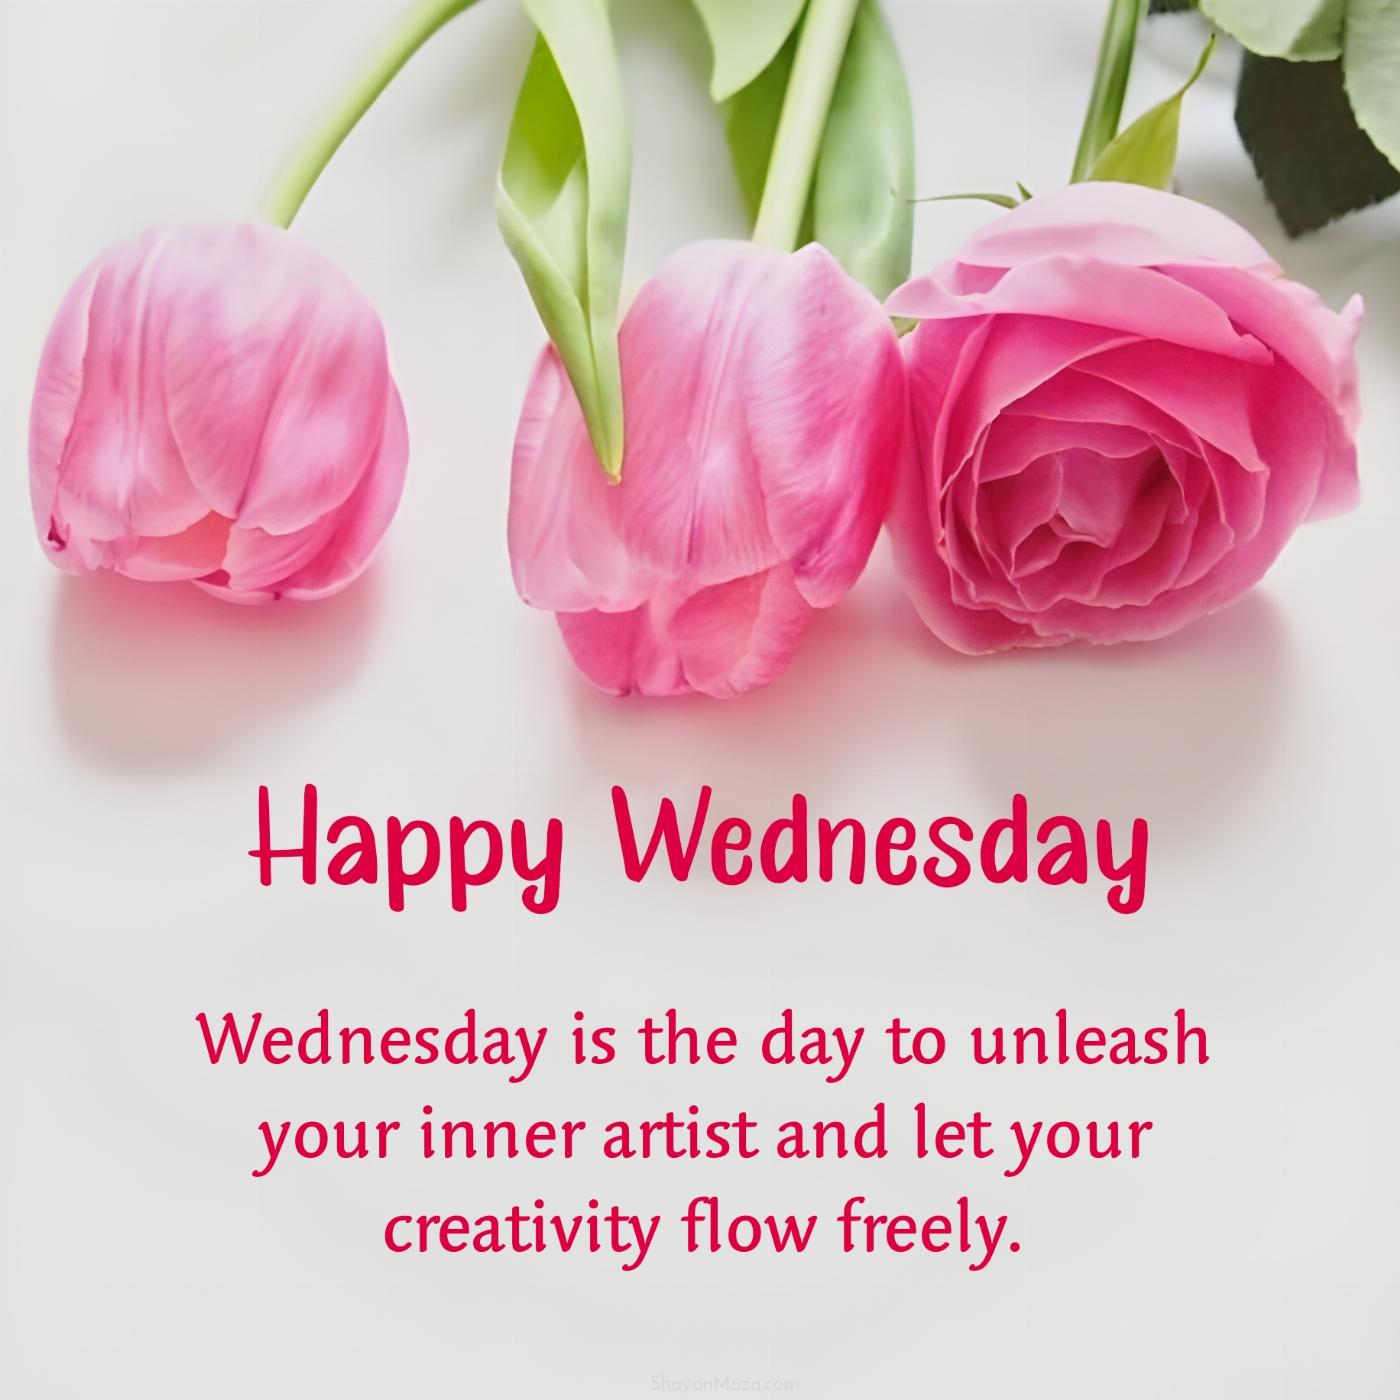 Wednesday is the day to unleash your inner artist and let your creativity flow freely